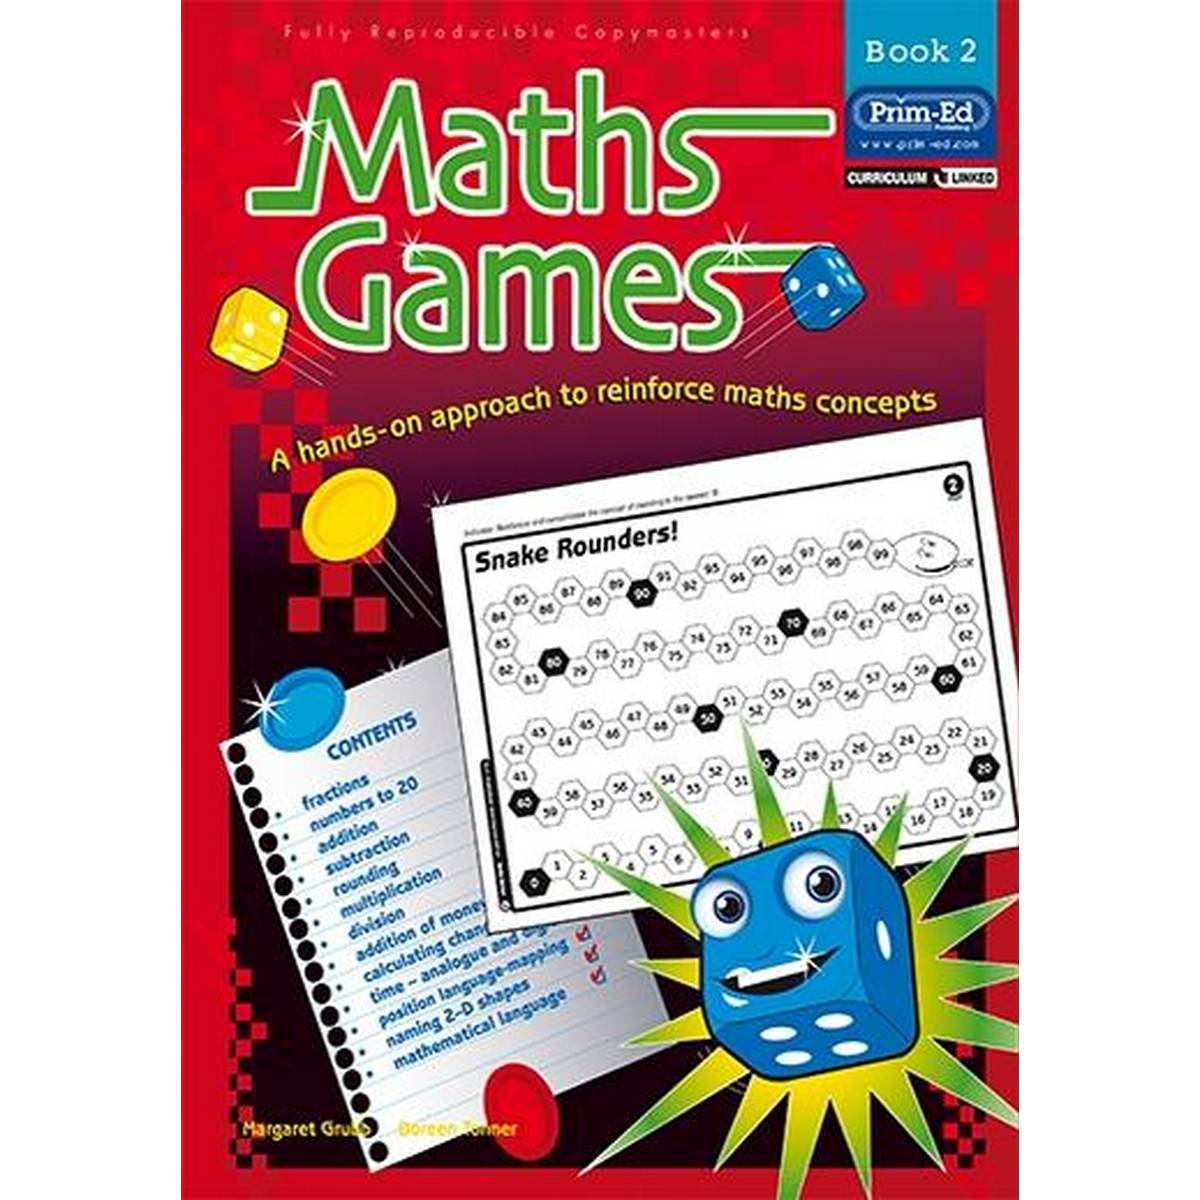 MATHS GAMES: MIDDLE